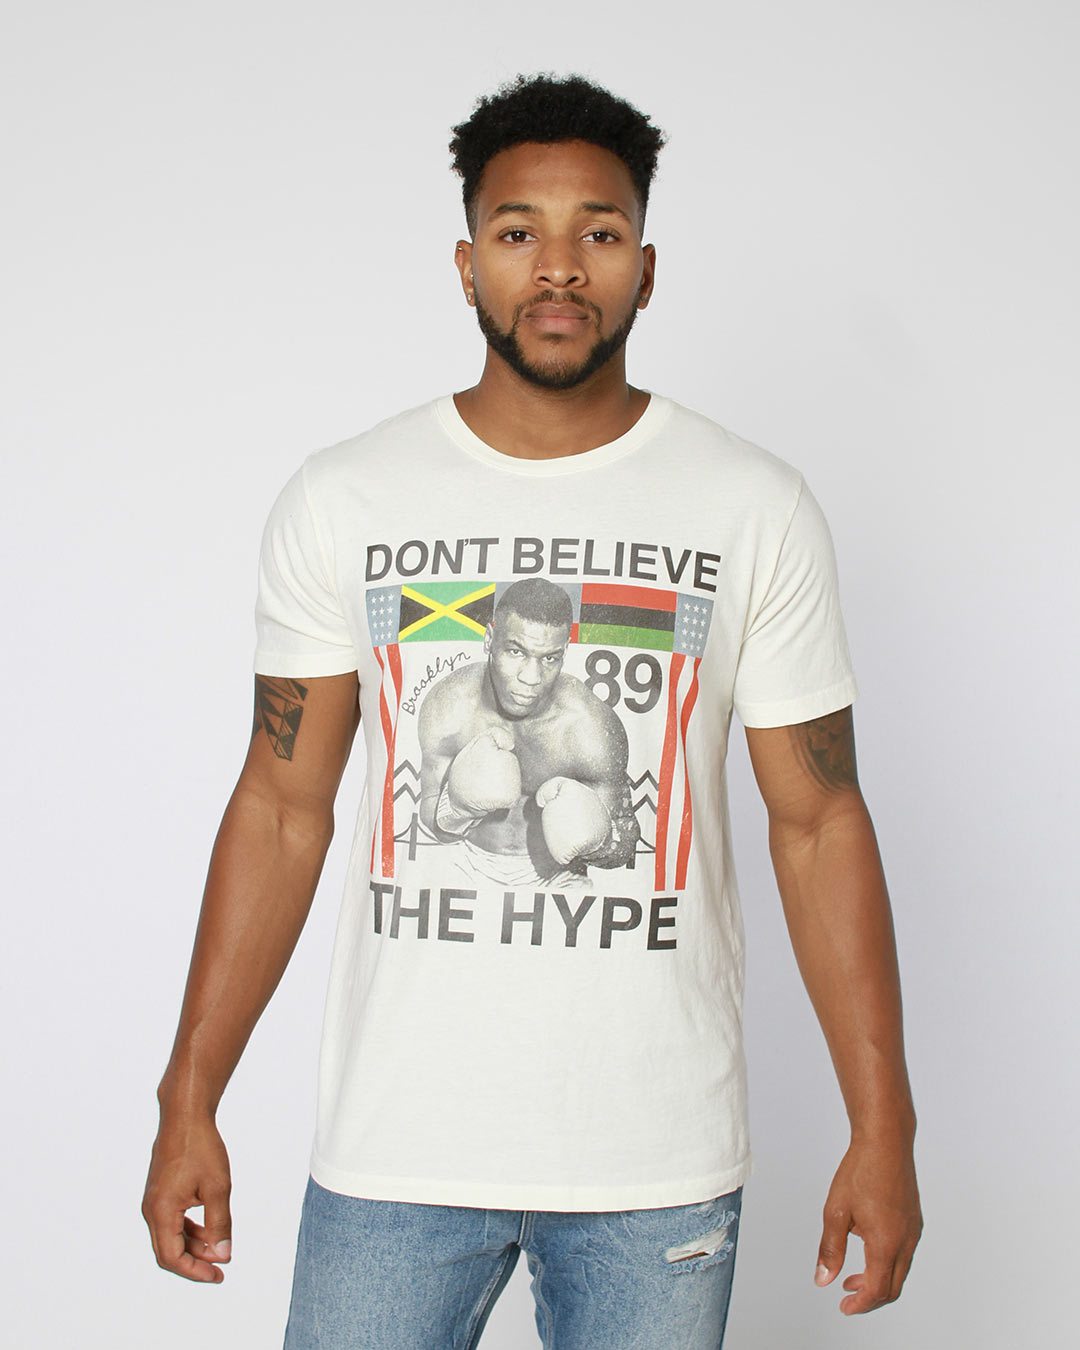 Tyson Don T Believe The Hype Tee Roots Of Inc Dba Roots Of Fight